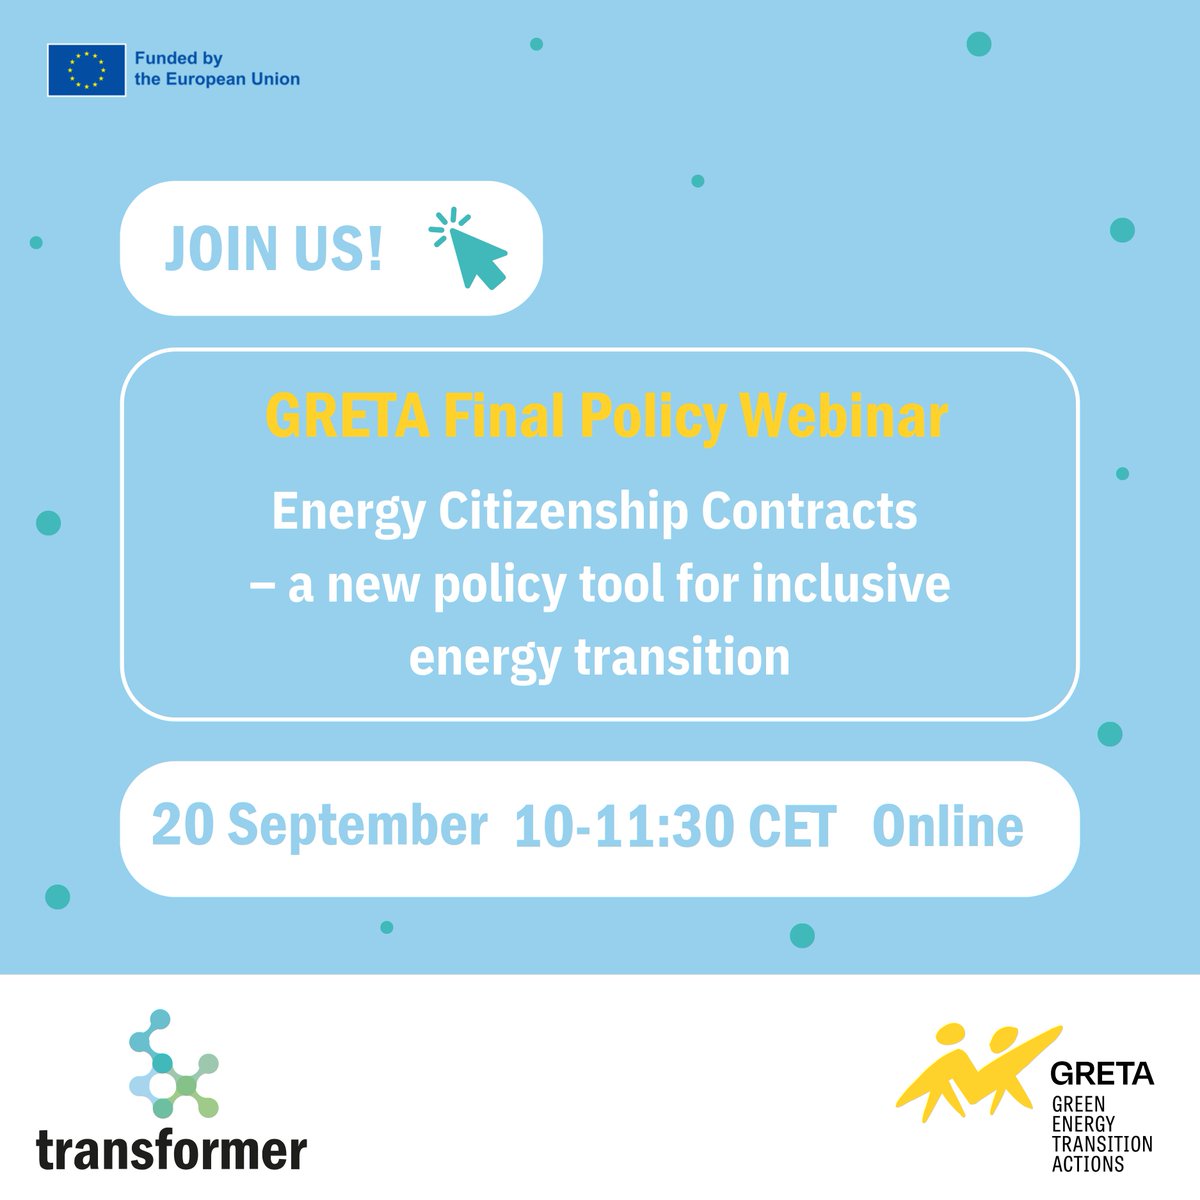 Join us at @ProjectGreta's final policy webinar to learn how we can empower #EuropeanCitizens in the energy transition!

📅20 September, 2023
⏰10:00 AM to 11:30 AM, CET
📍Online

✅Register by 17 September via projectgreta.eu/events/greta-f…